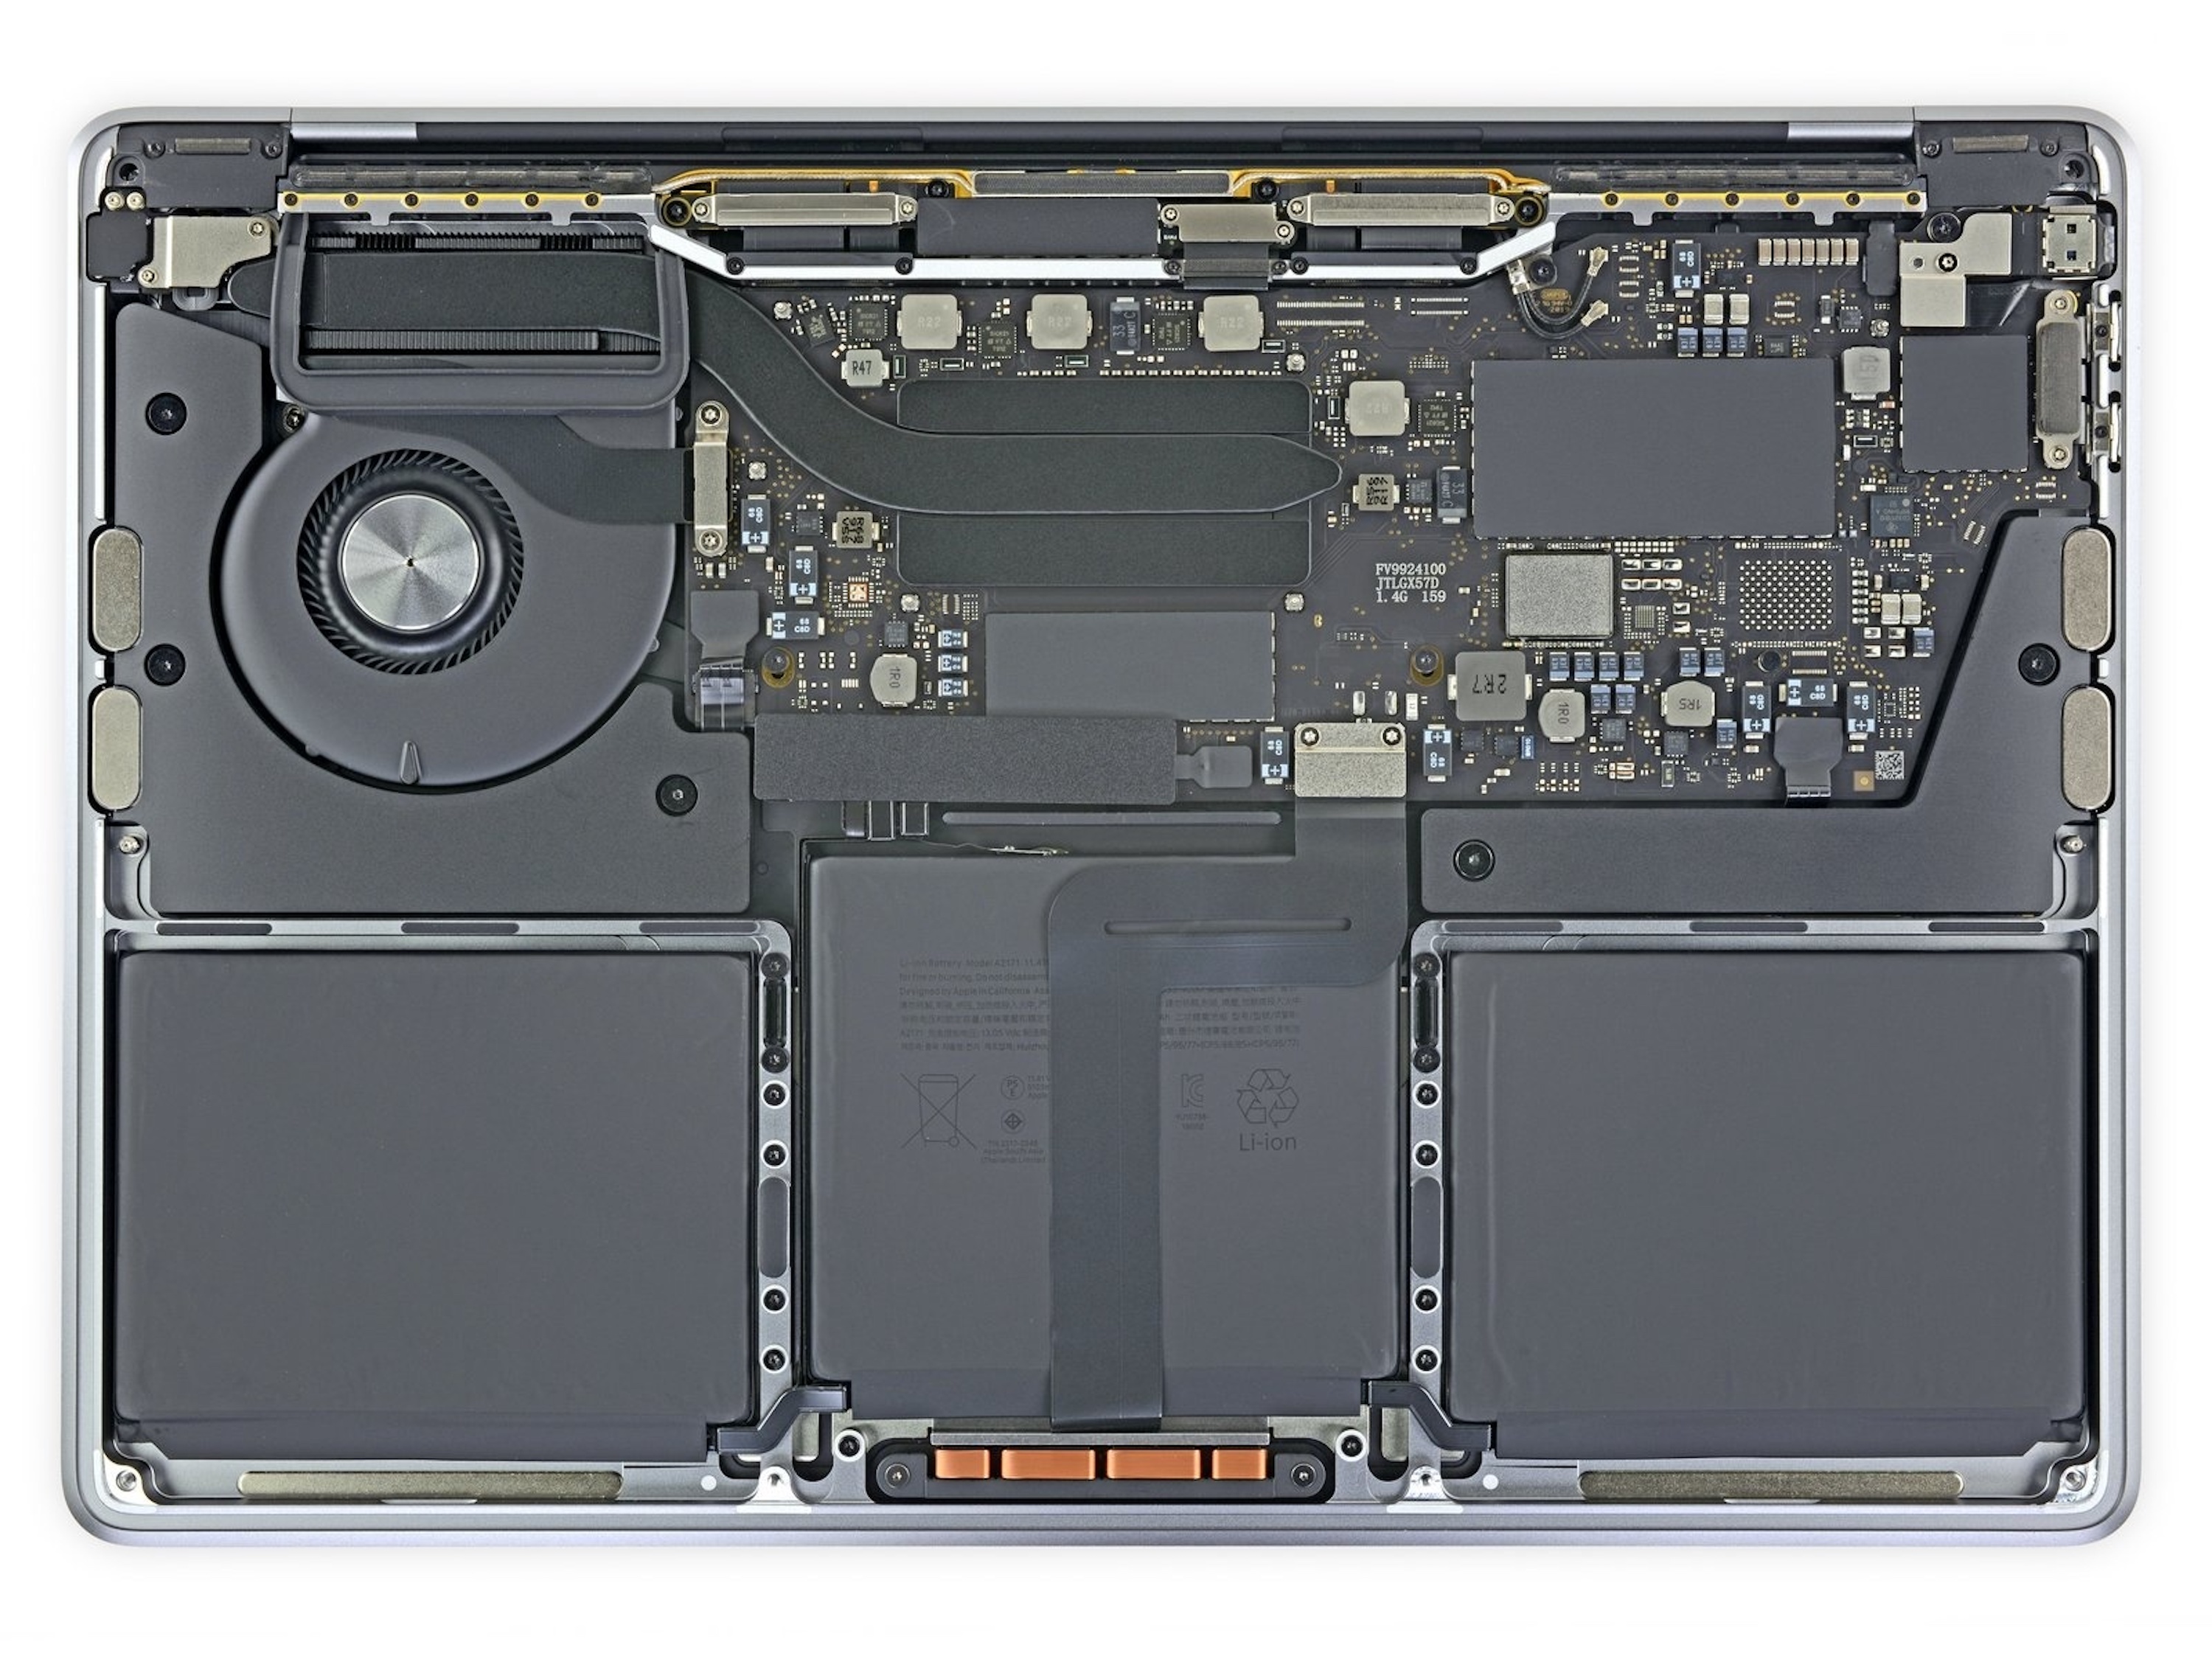 iFixit's teardown shows how similar the new M1 MacBook is